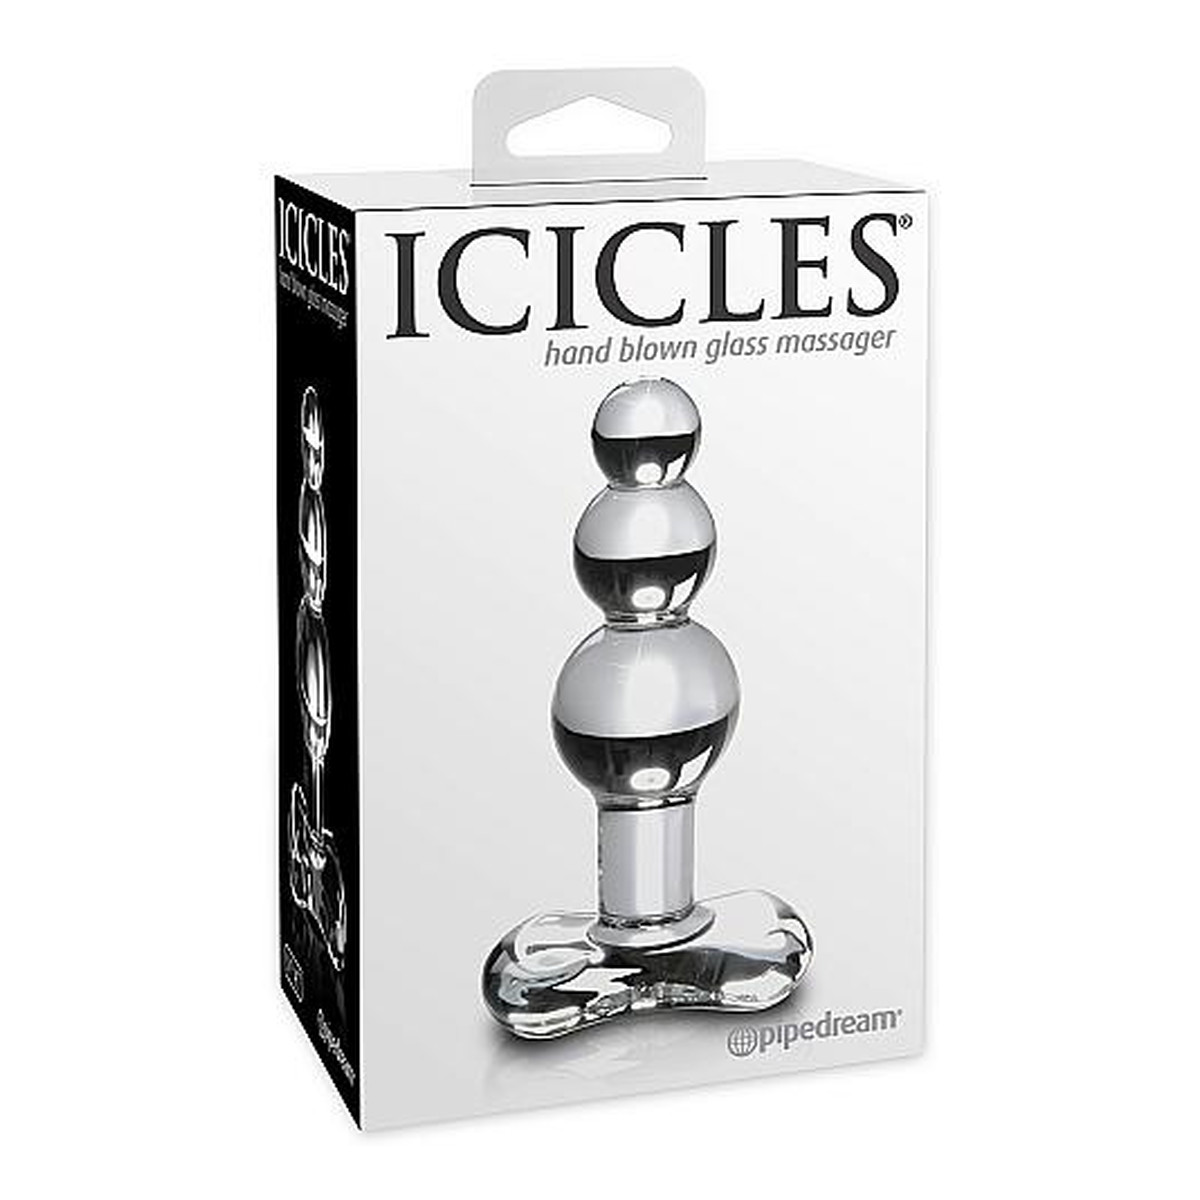 Pipedream Icicles Hand Blown Glass Massager korek analny szklany